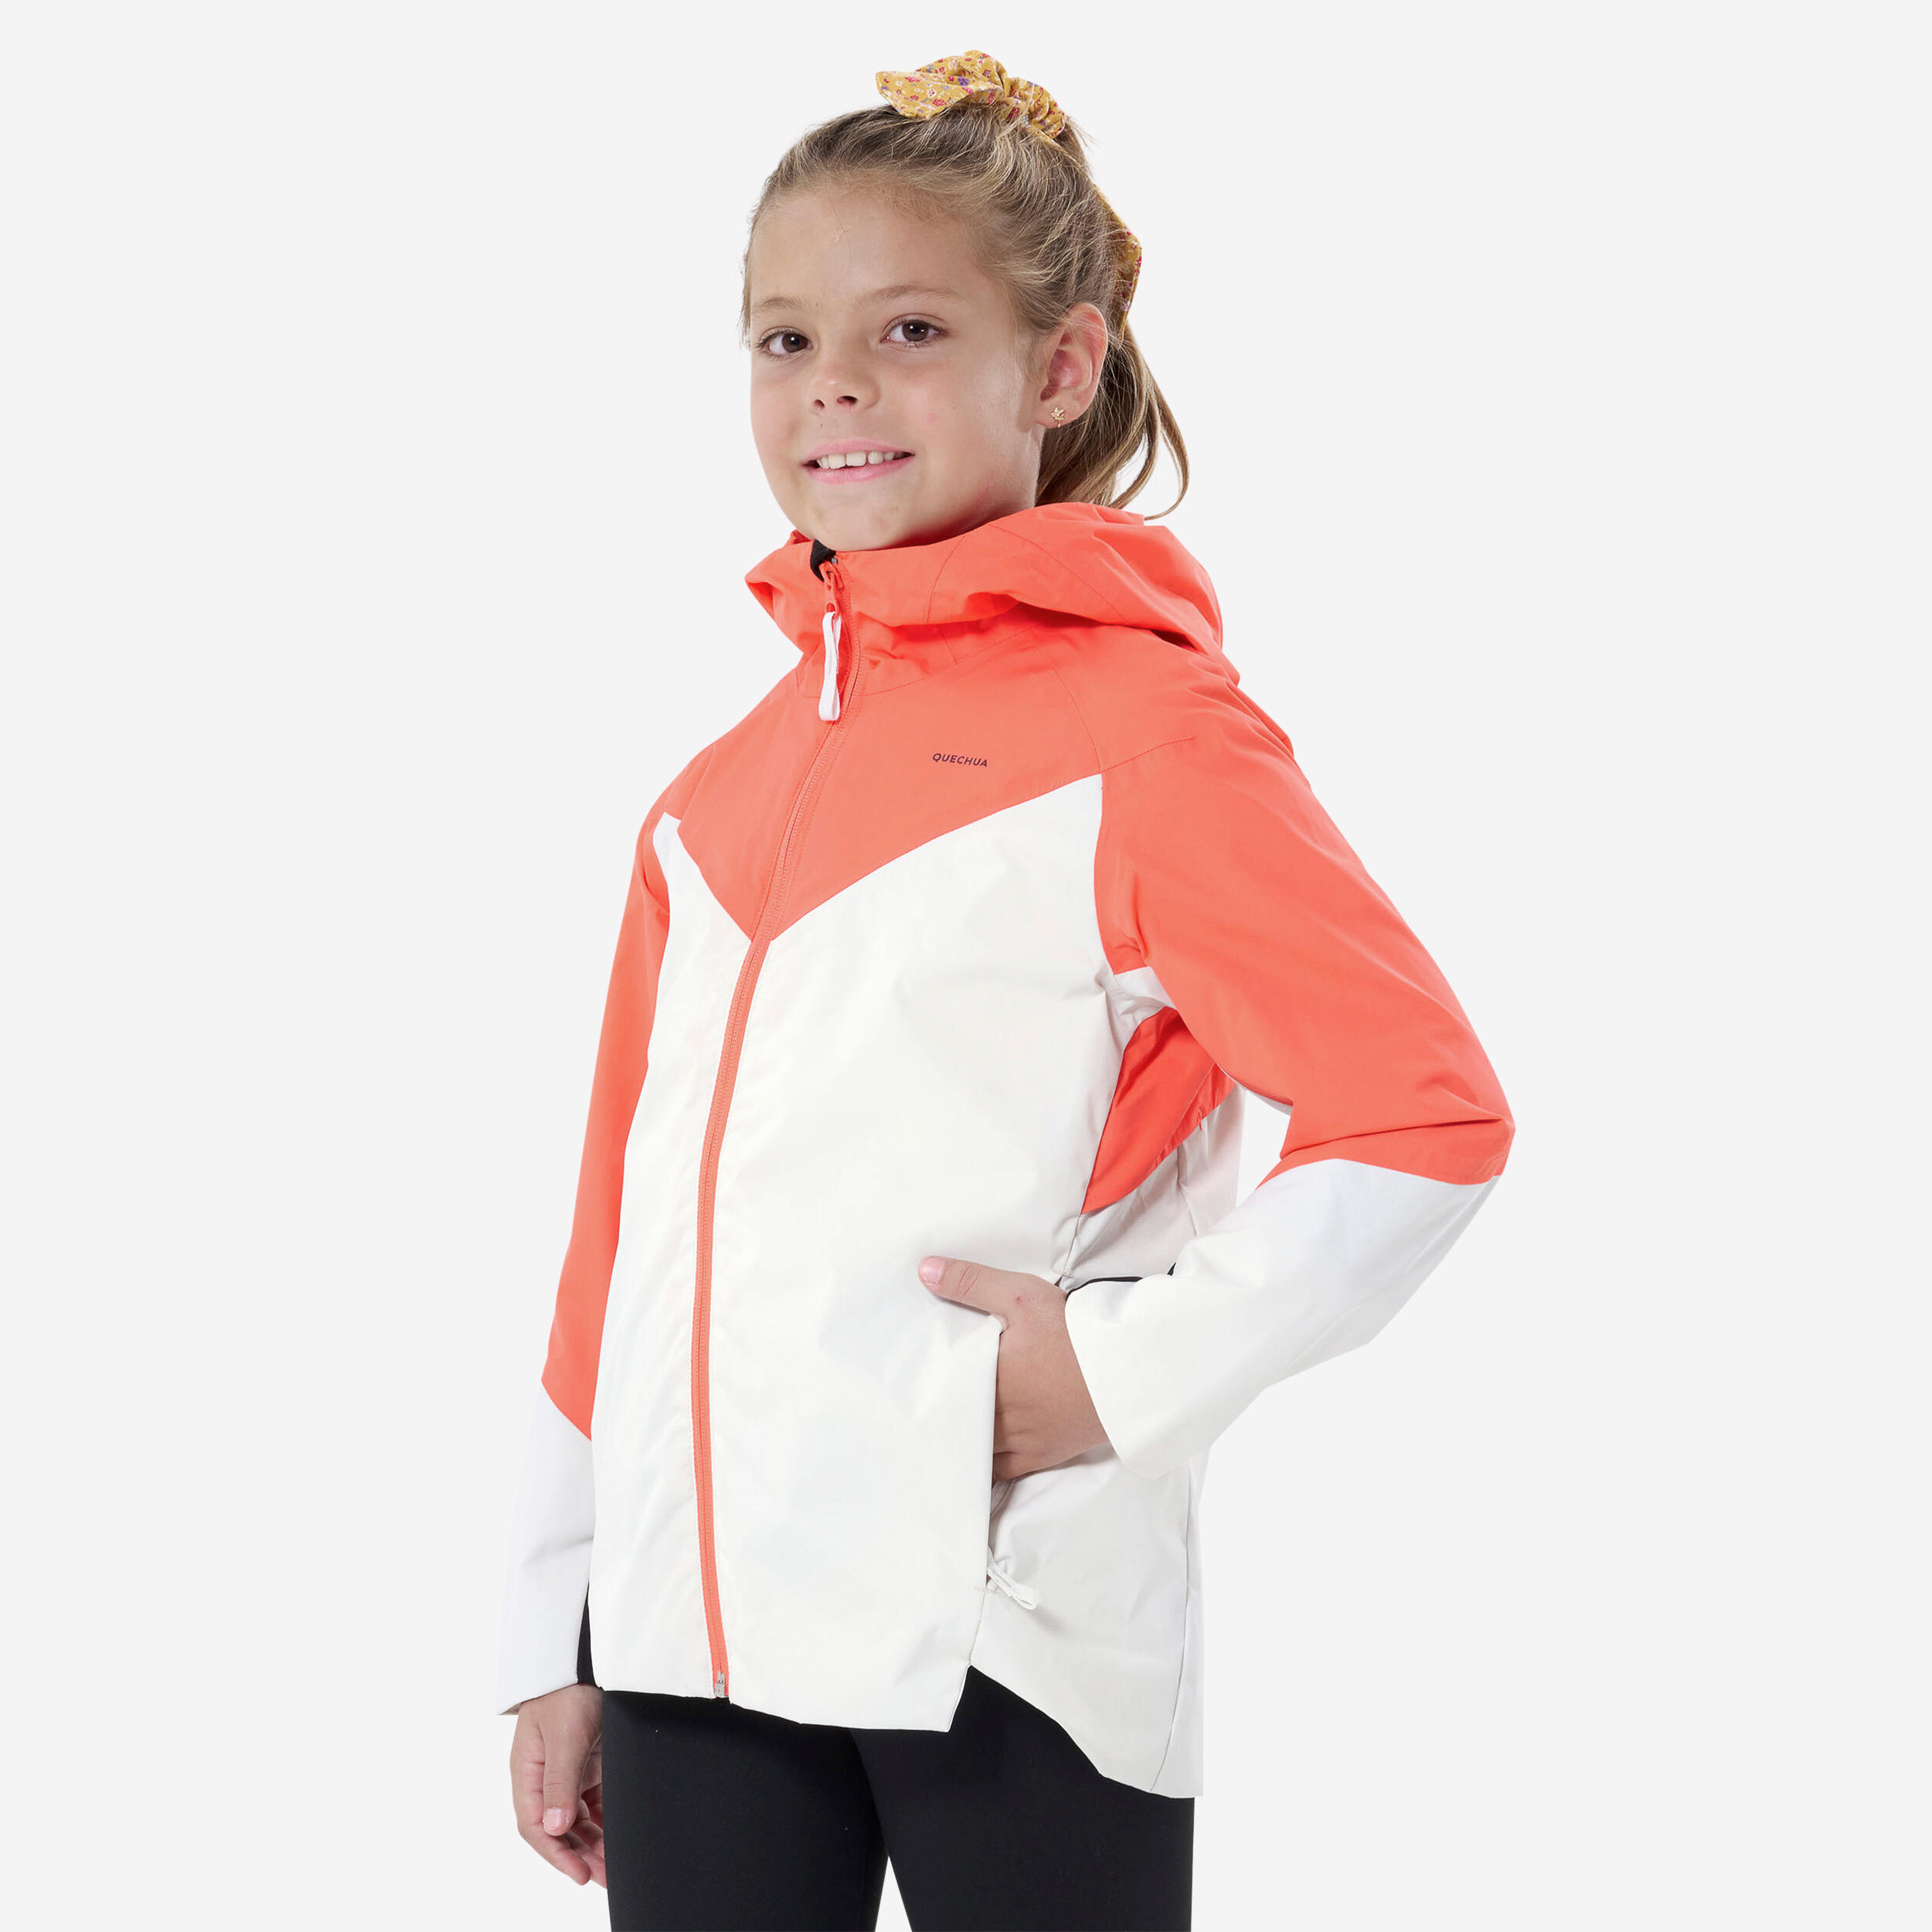 Child's waterproof hiking jacket - MH500 coral and beige - 7-15 years 1/7